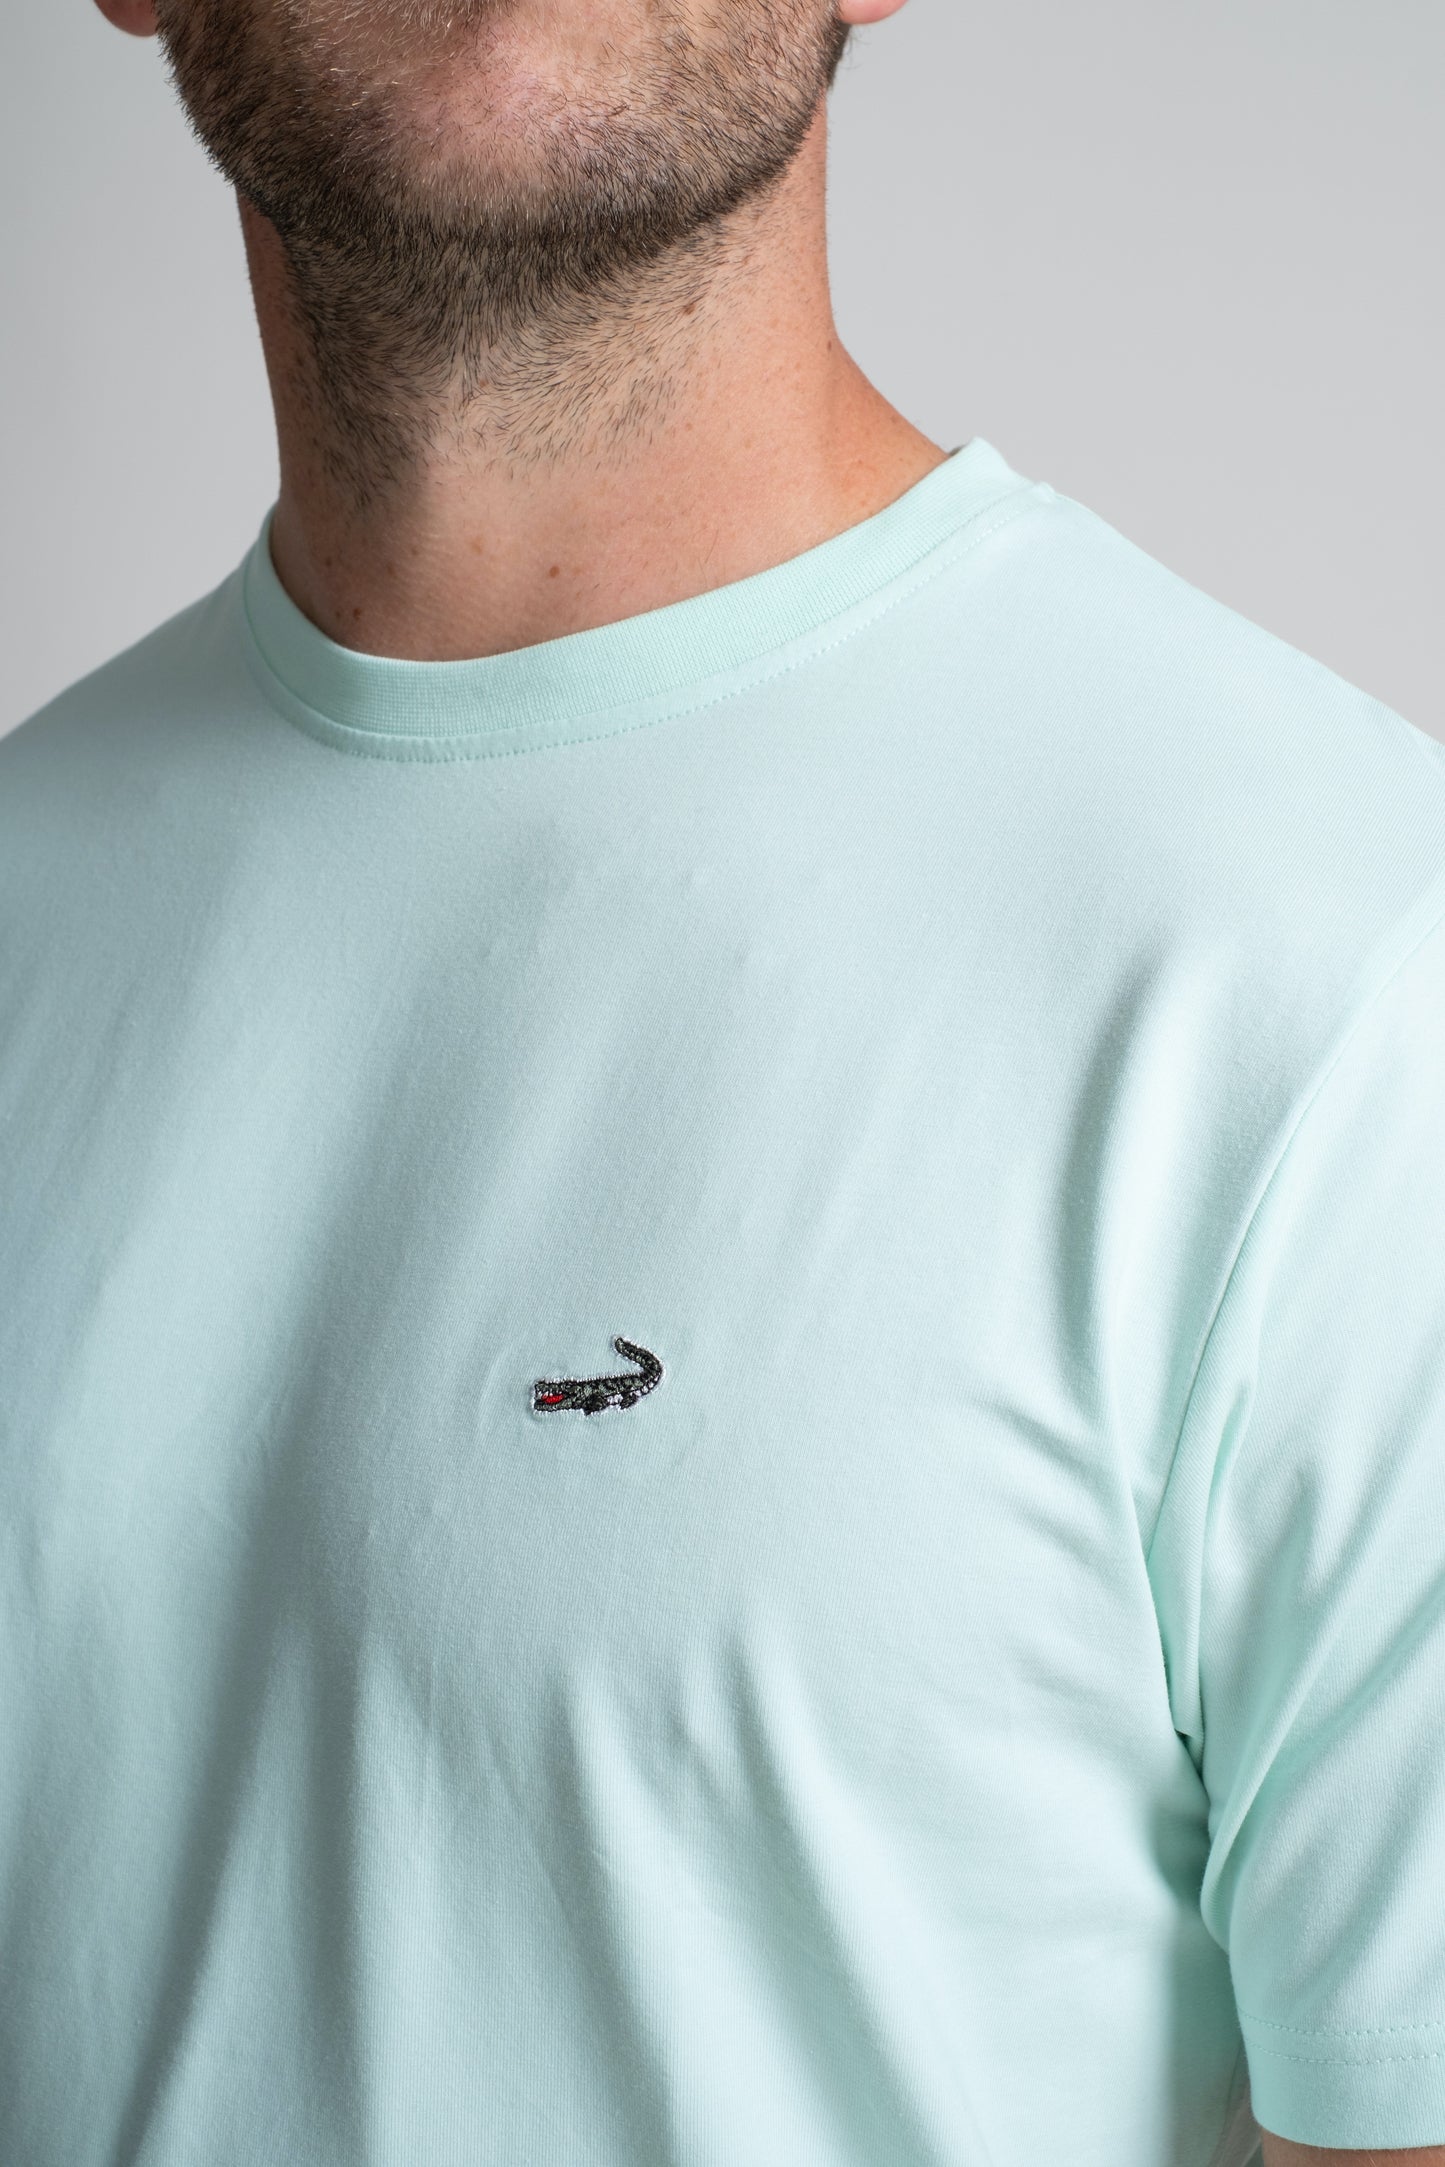 Classic Fit Short sleeves-CasualCrew Neck - Mist Green